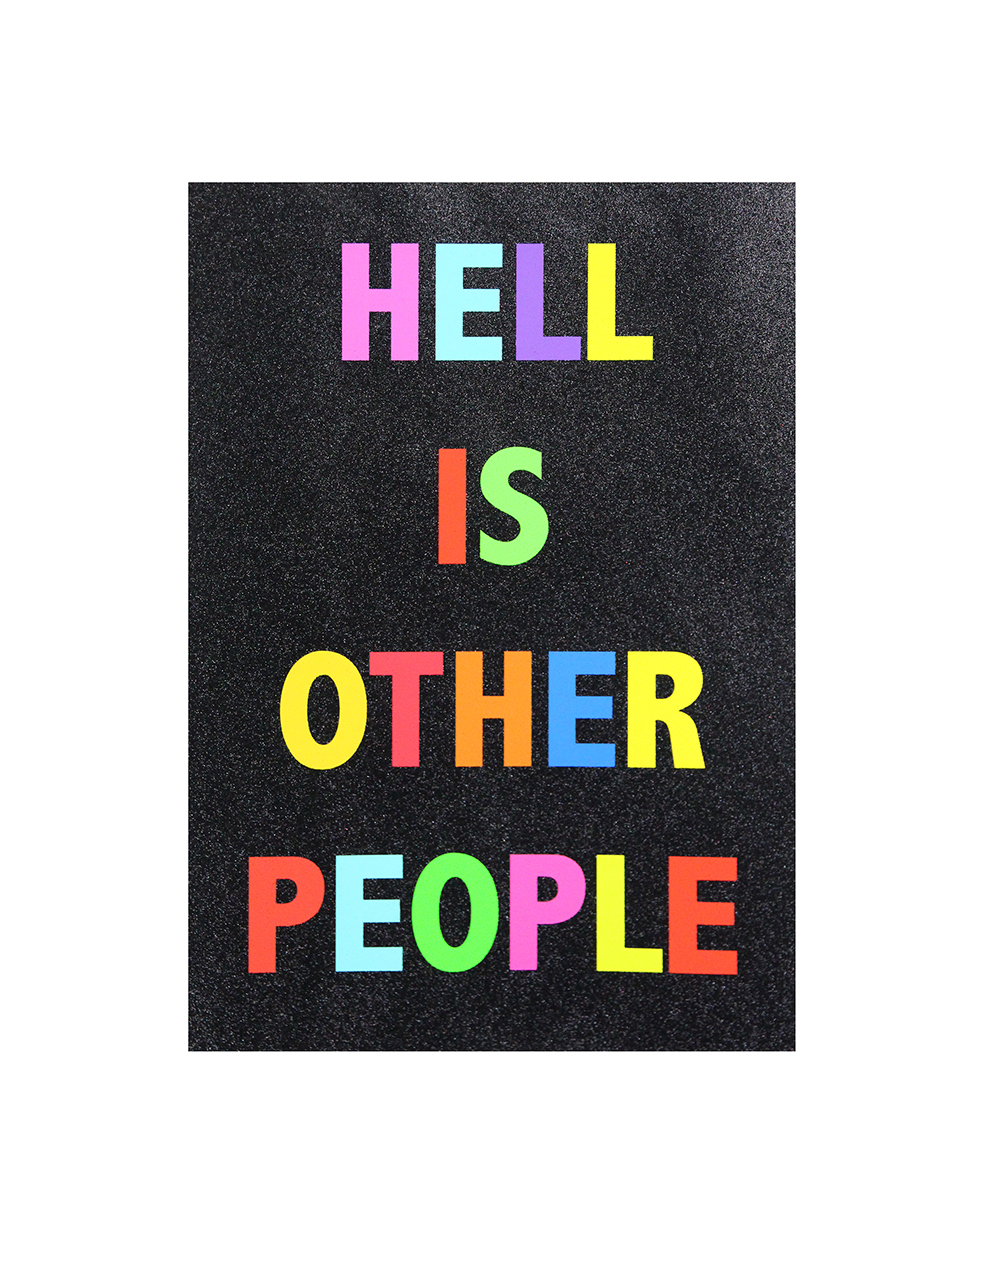 Hell is Others for ios download